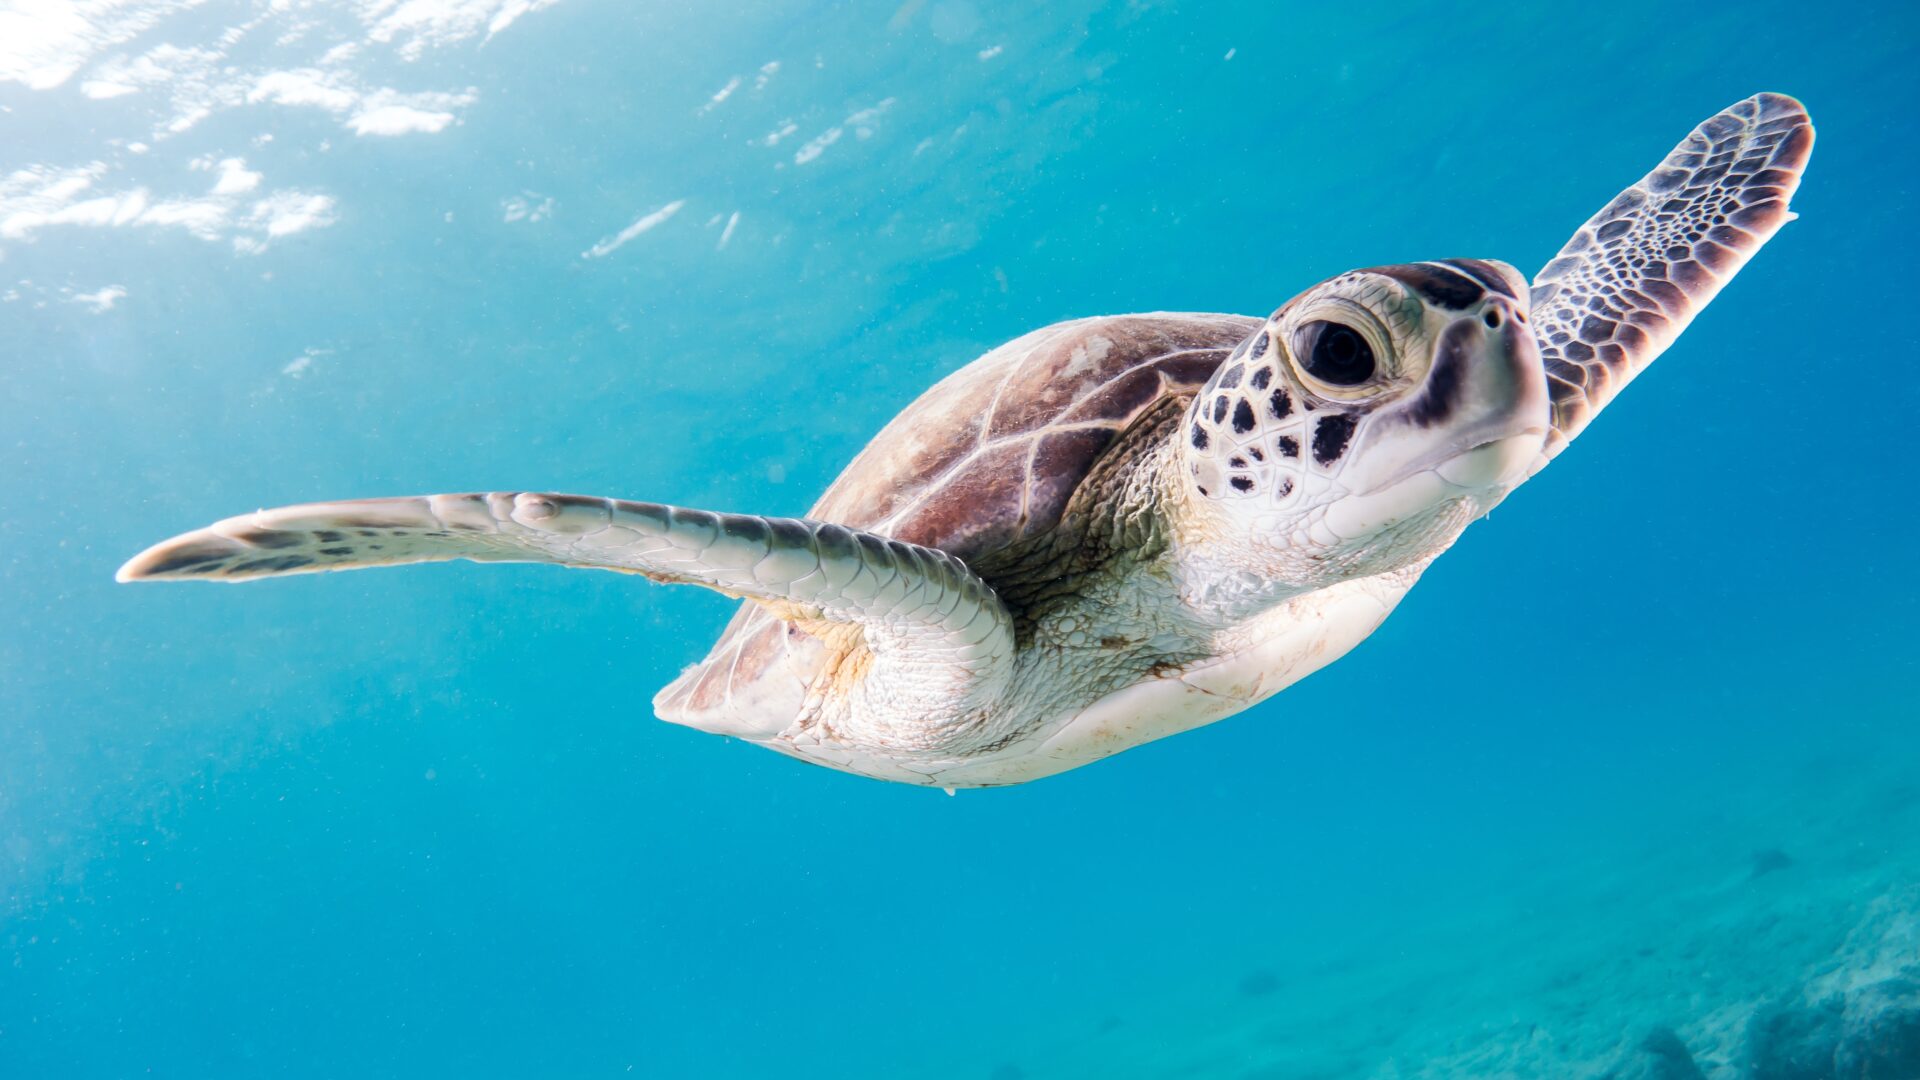 A turtle swimming in the ocean under water.